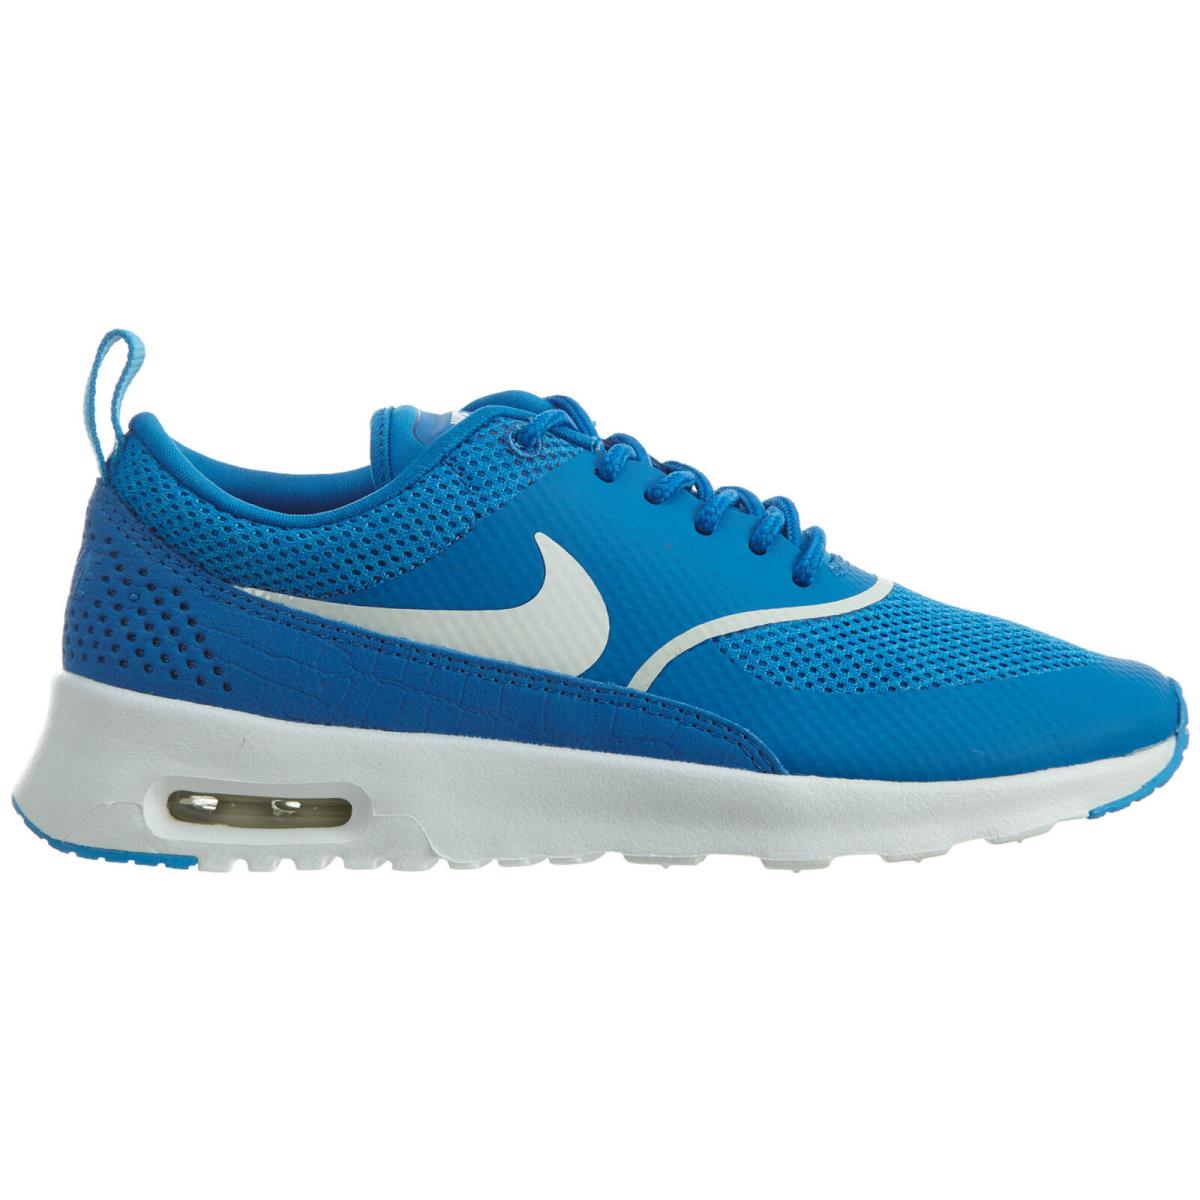 Nike Air Max Thea Womens 599409-413 Blue Spark Glow White Running Shoes Size 6